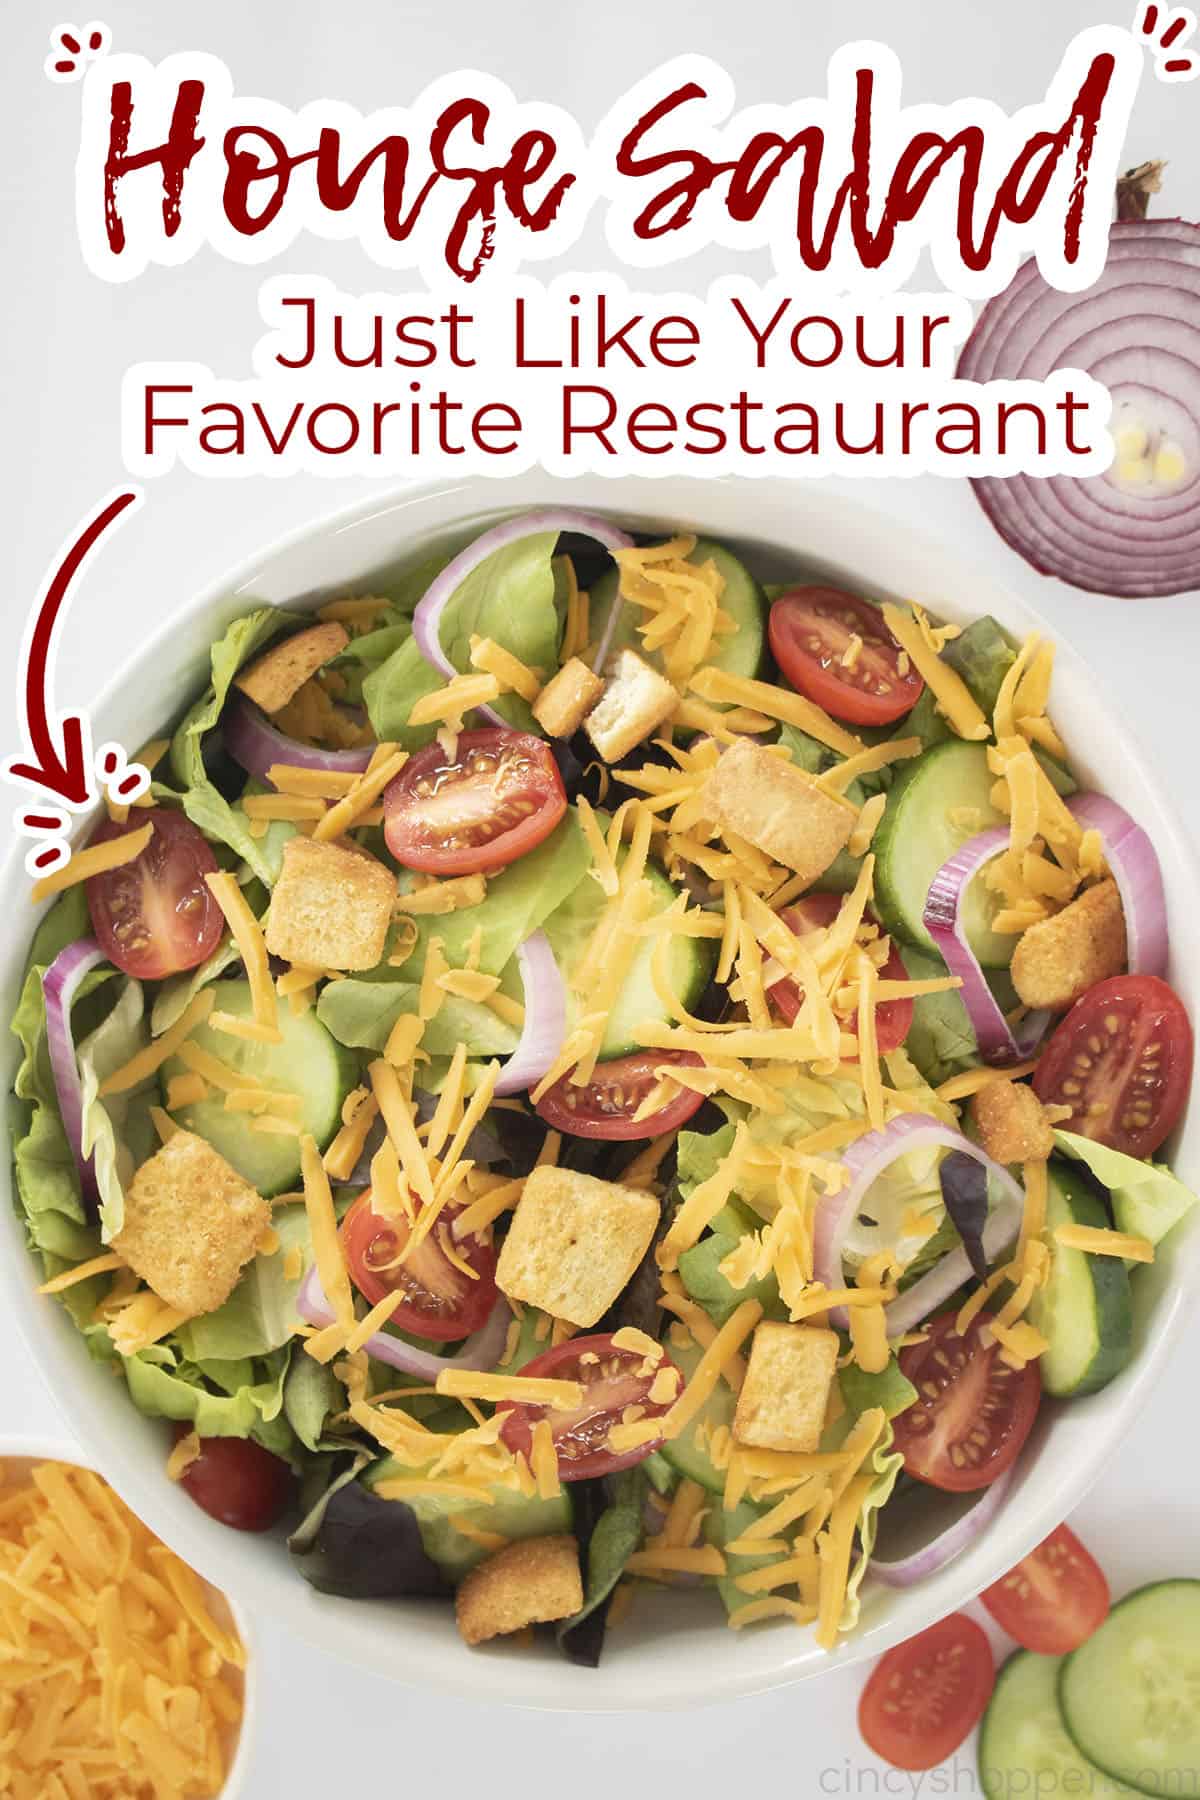 Text on image House Salad Just like your favorite restaurant.